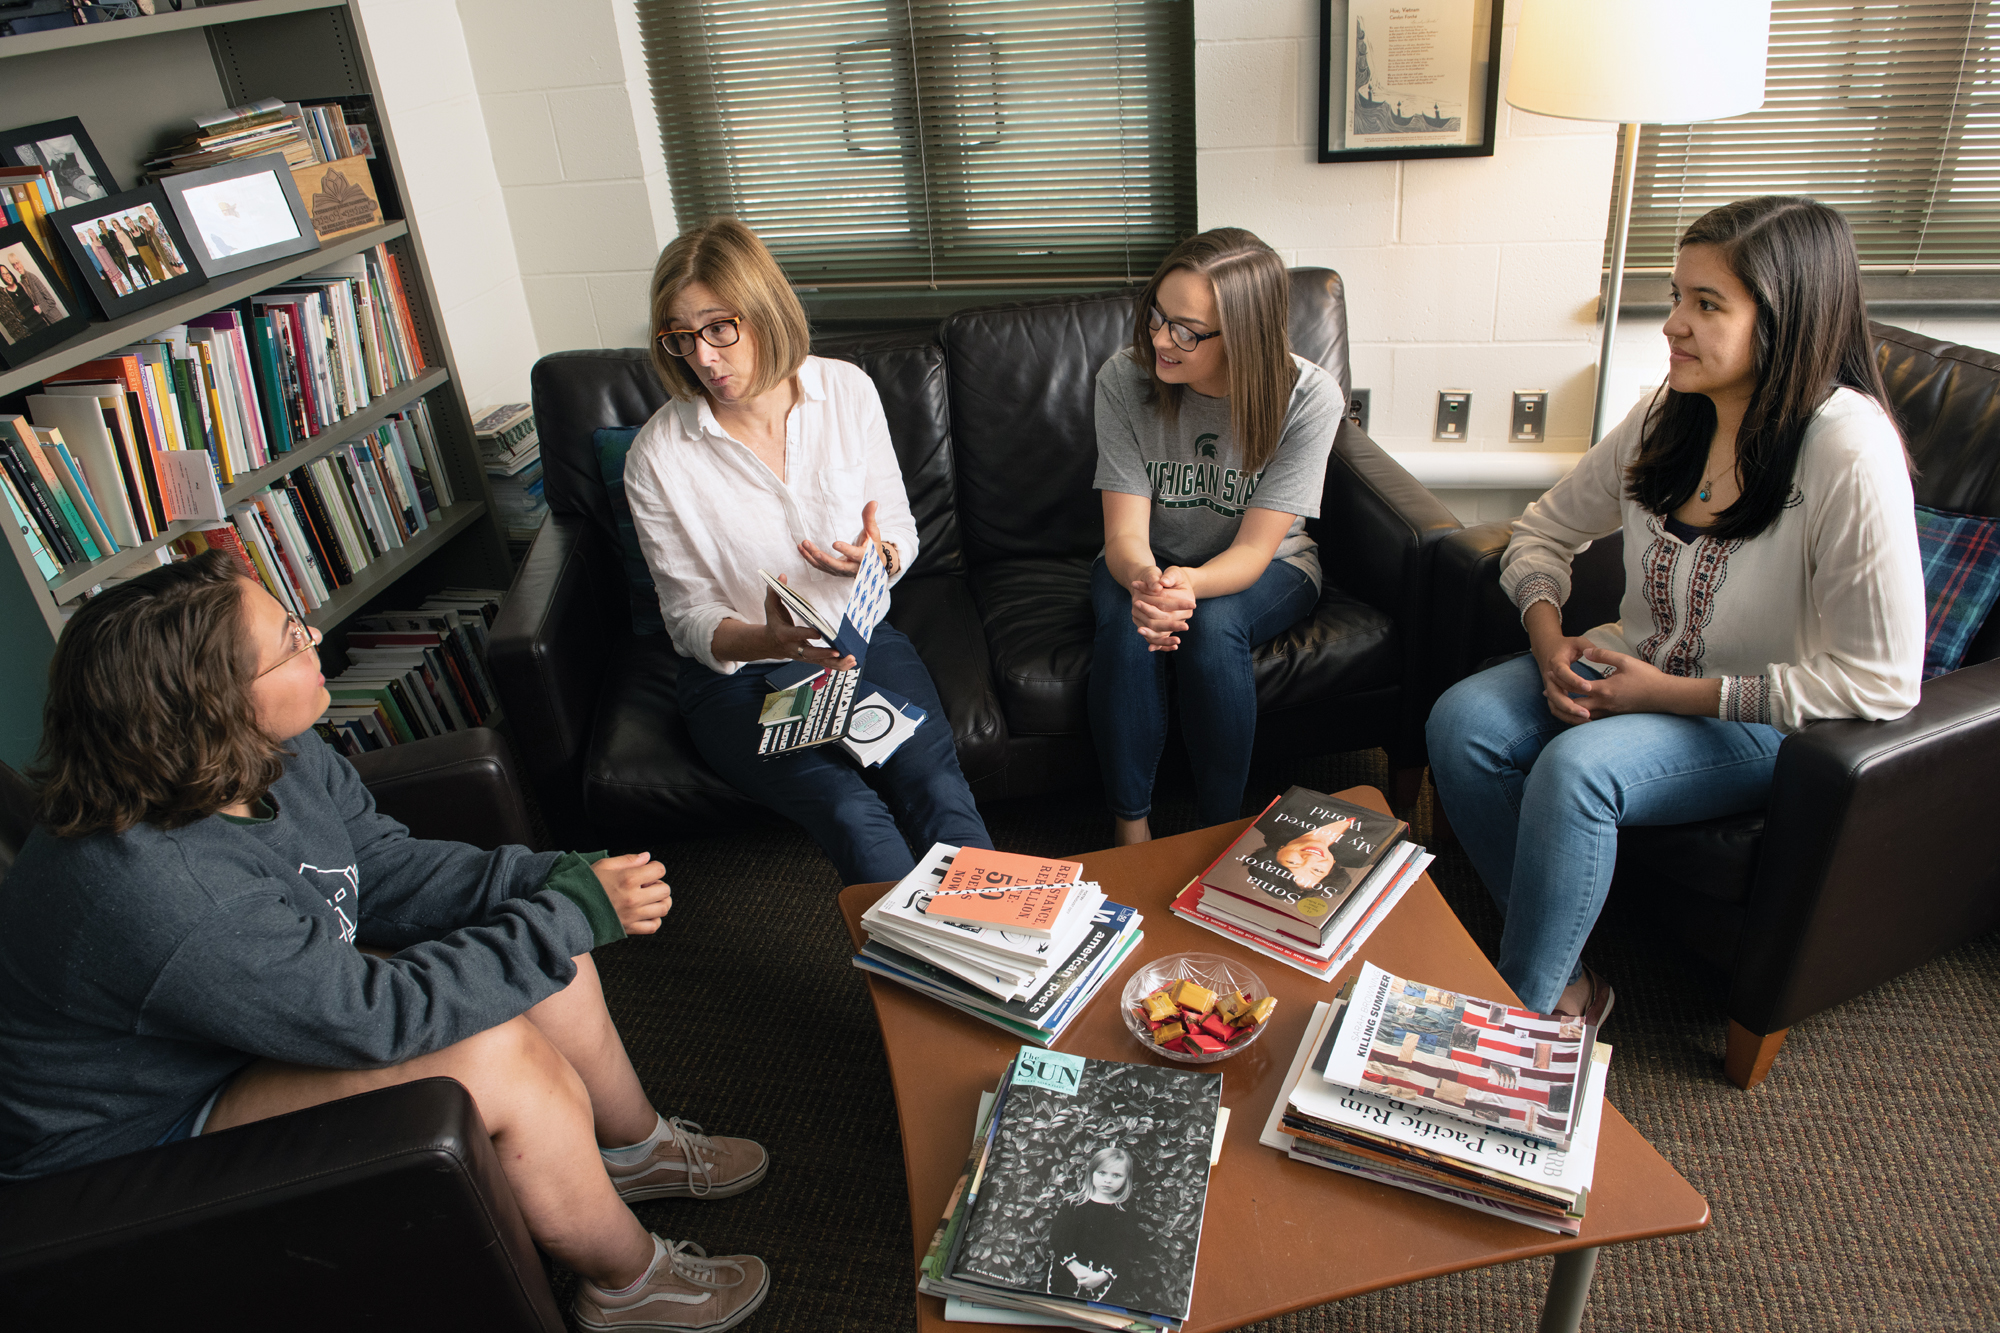 A female professor, Cindy Hunter-Morgan, sits on a black couch in the Center for Poetry. Several students sit near her as she discusses a book of poetry with them.